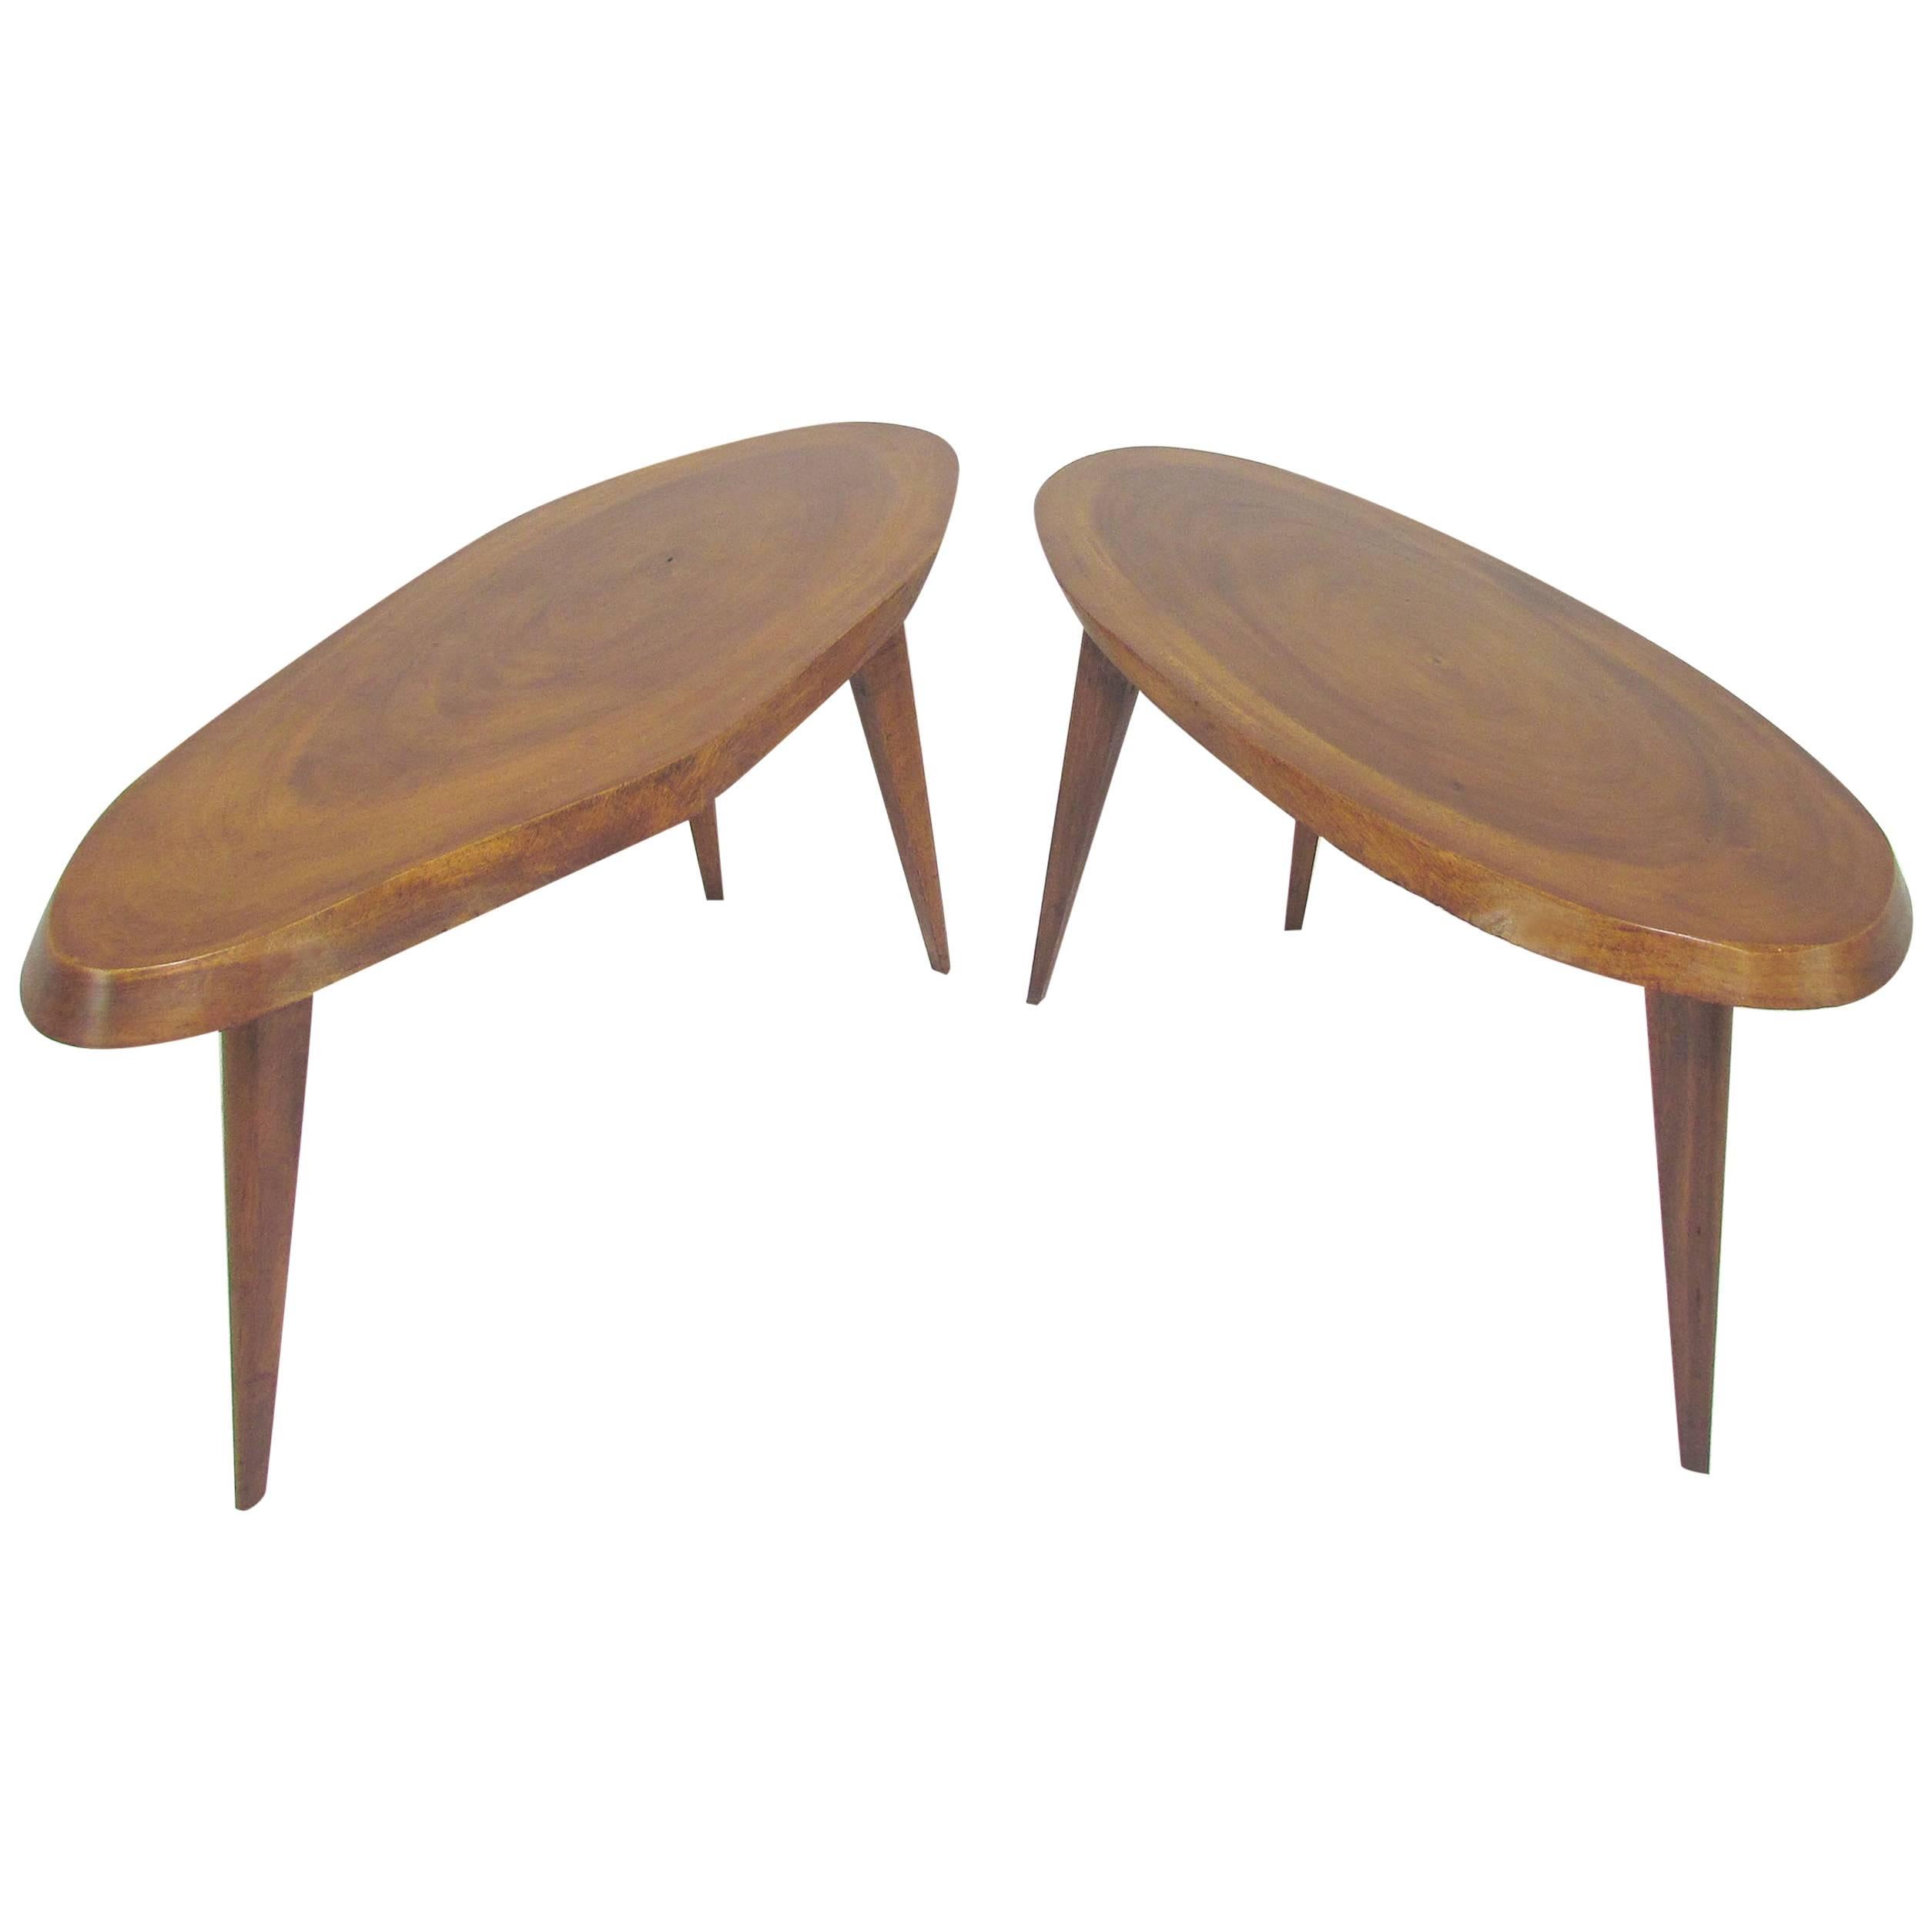 Pair of Mid-Century Free-Form Live Edge Studio Coffee or End Tables in Walnut